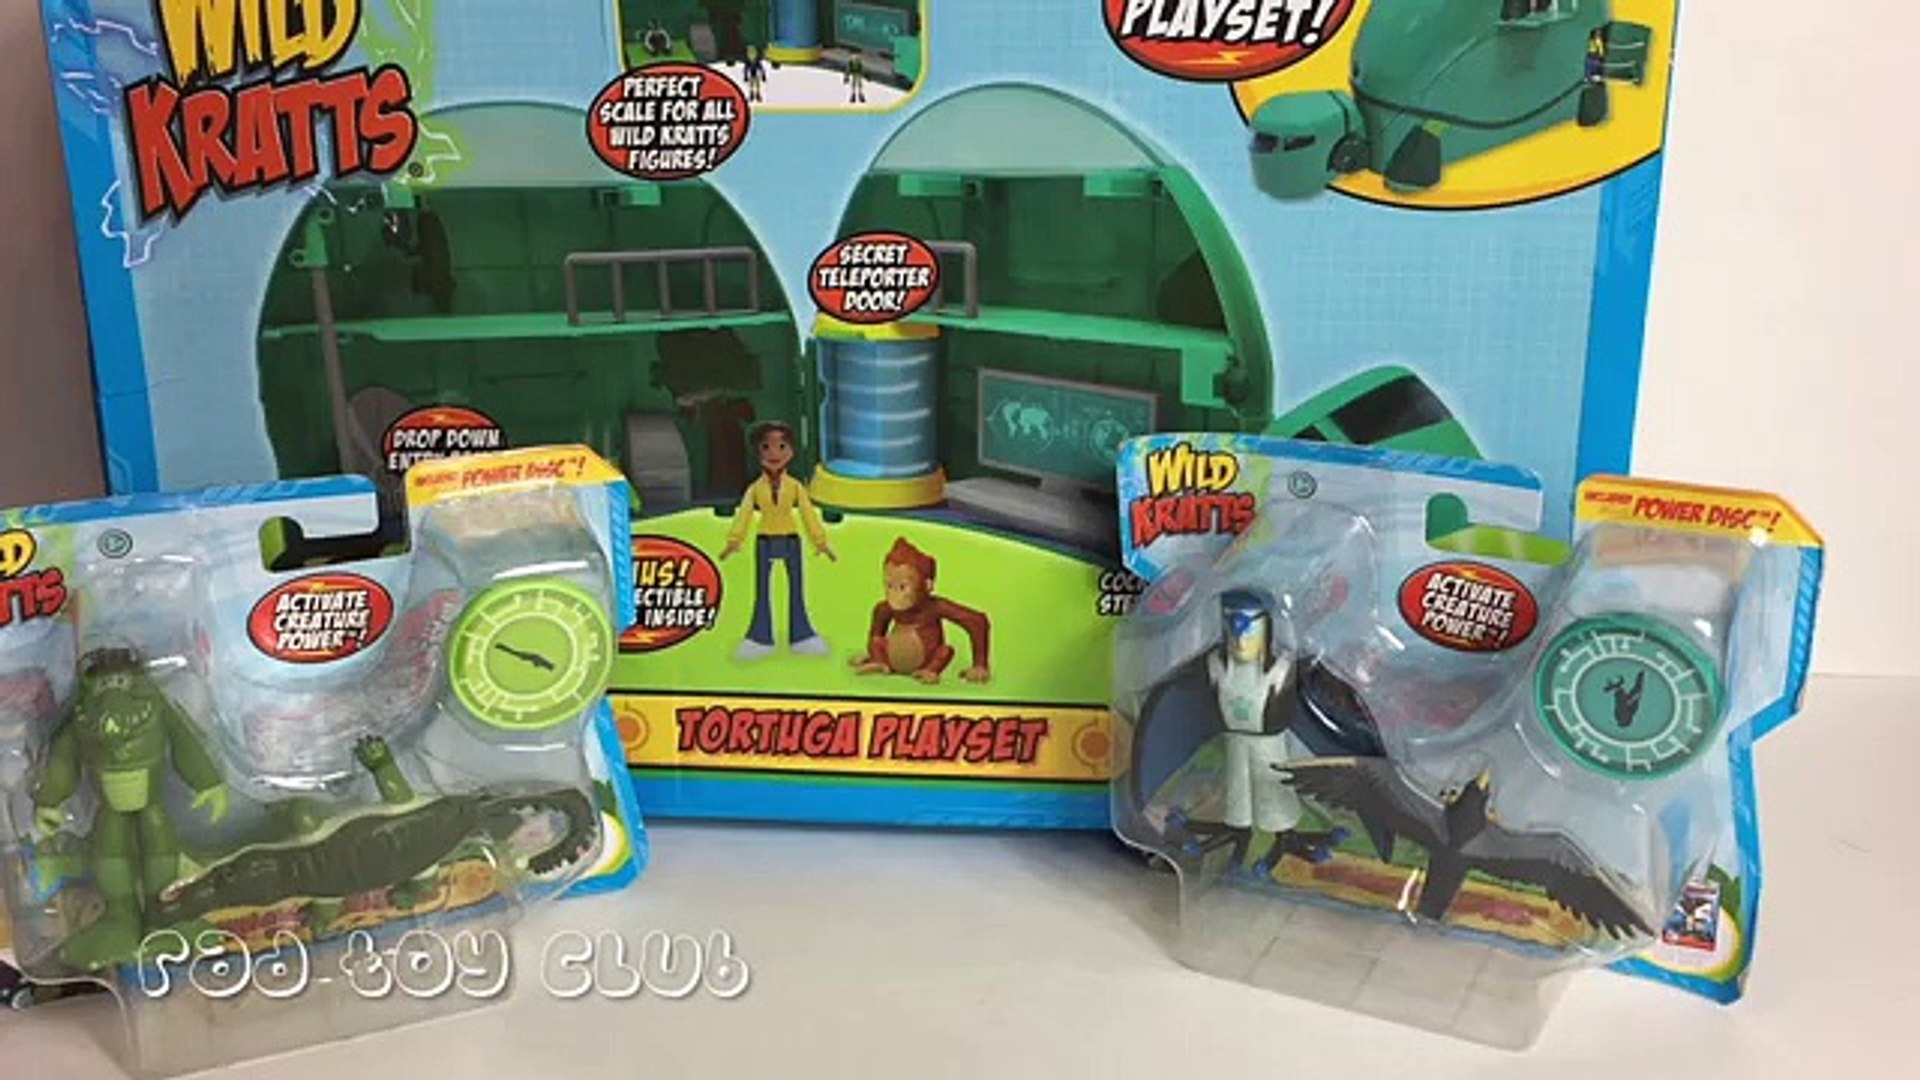 WILD KRATTS Tortuga Toy Unboxing + Surprise Kratts Toys Inside! - video  Dailymotion